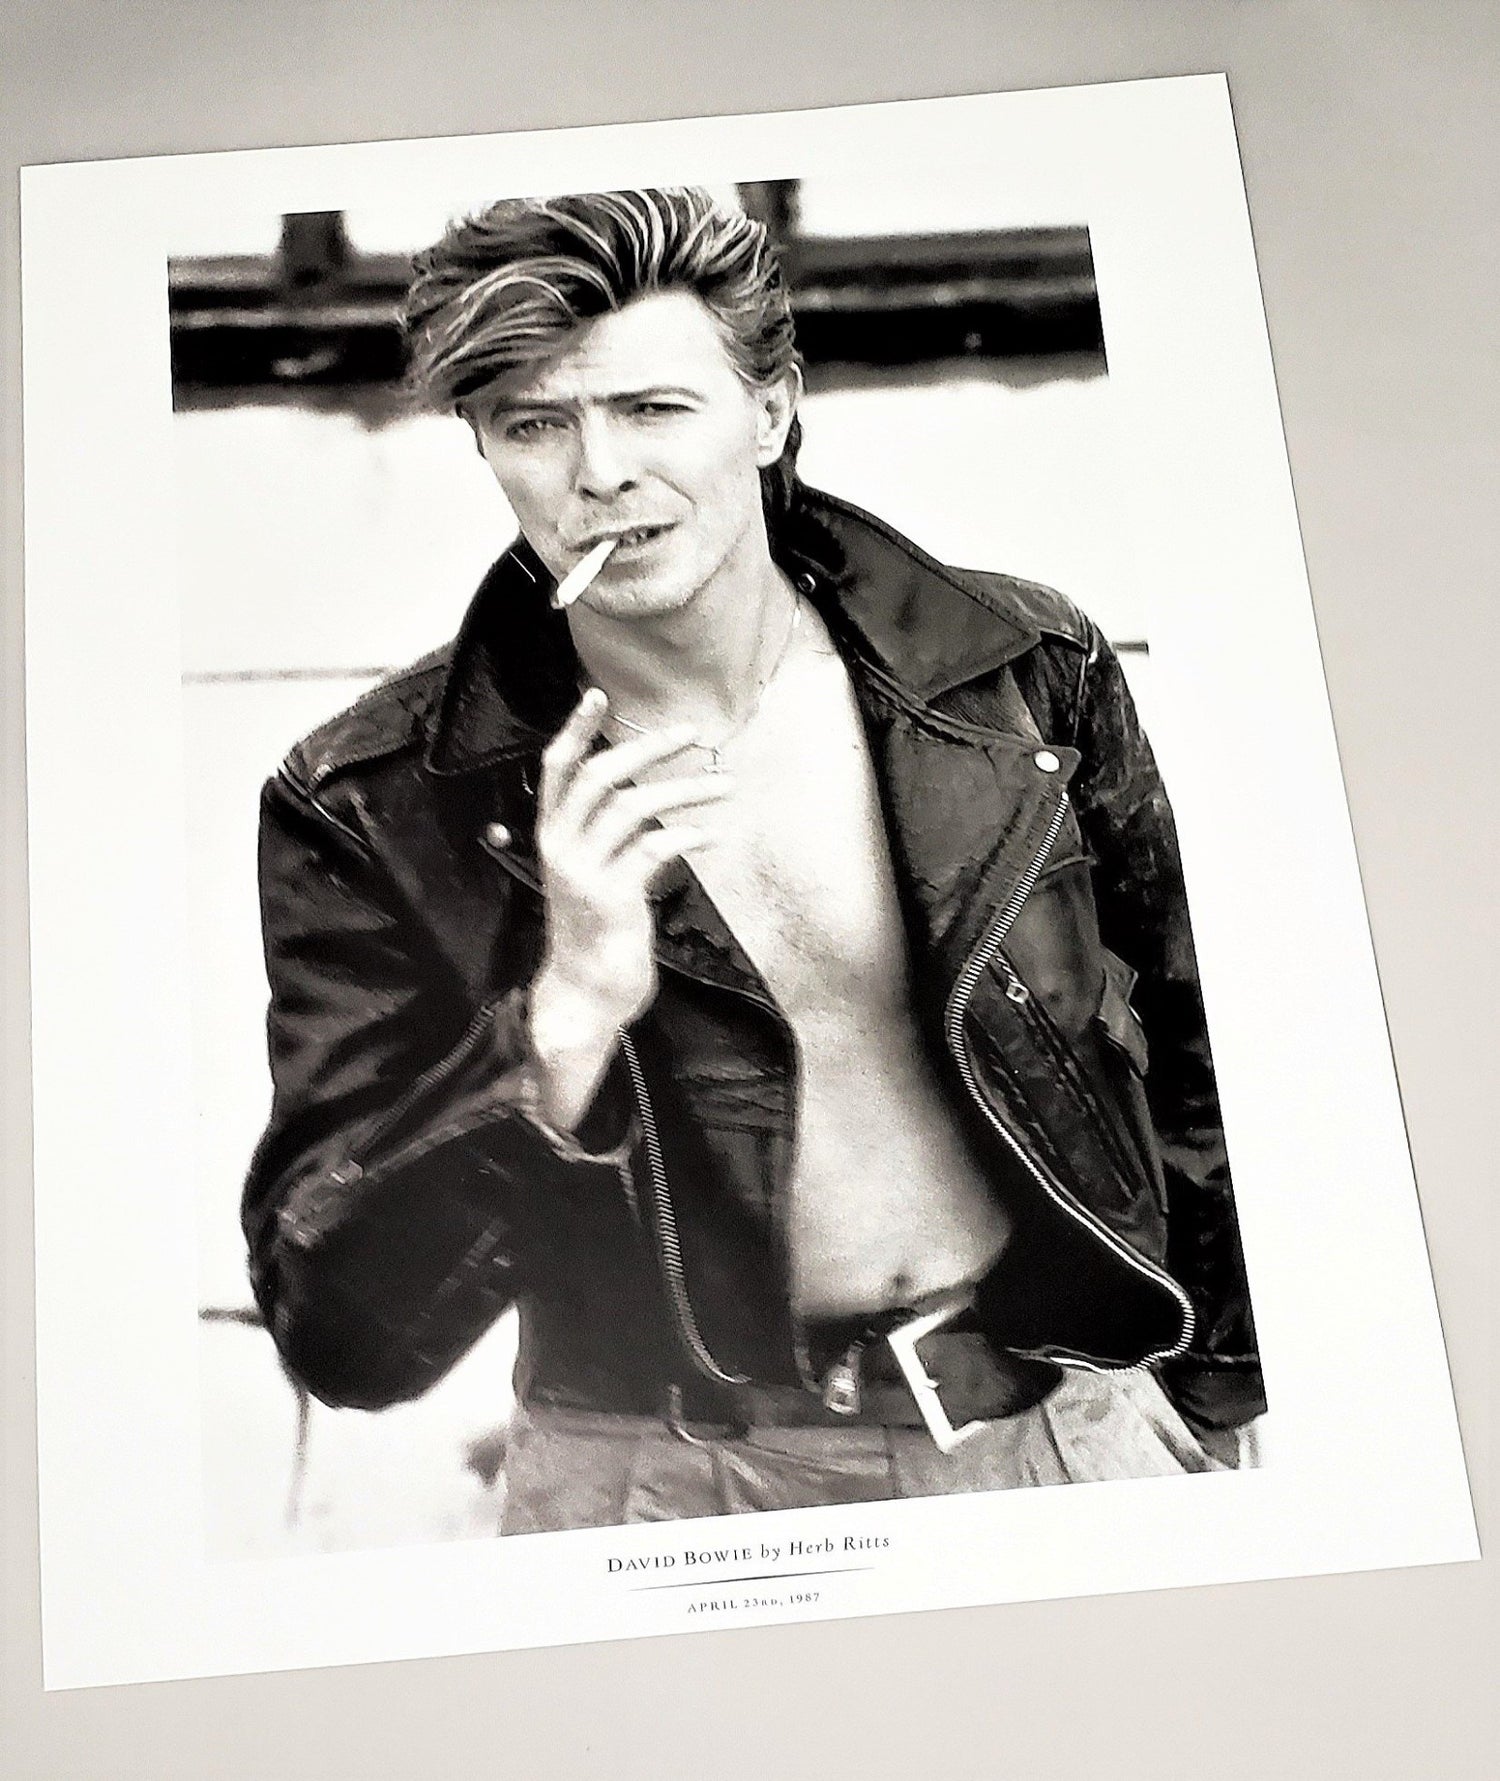 David Bowie photographed by Herb Ritts in 1987 featured in Rolling Stone: The Photographs book